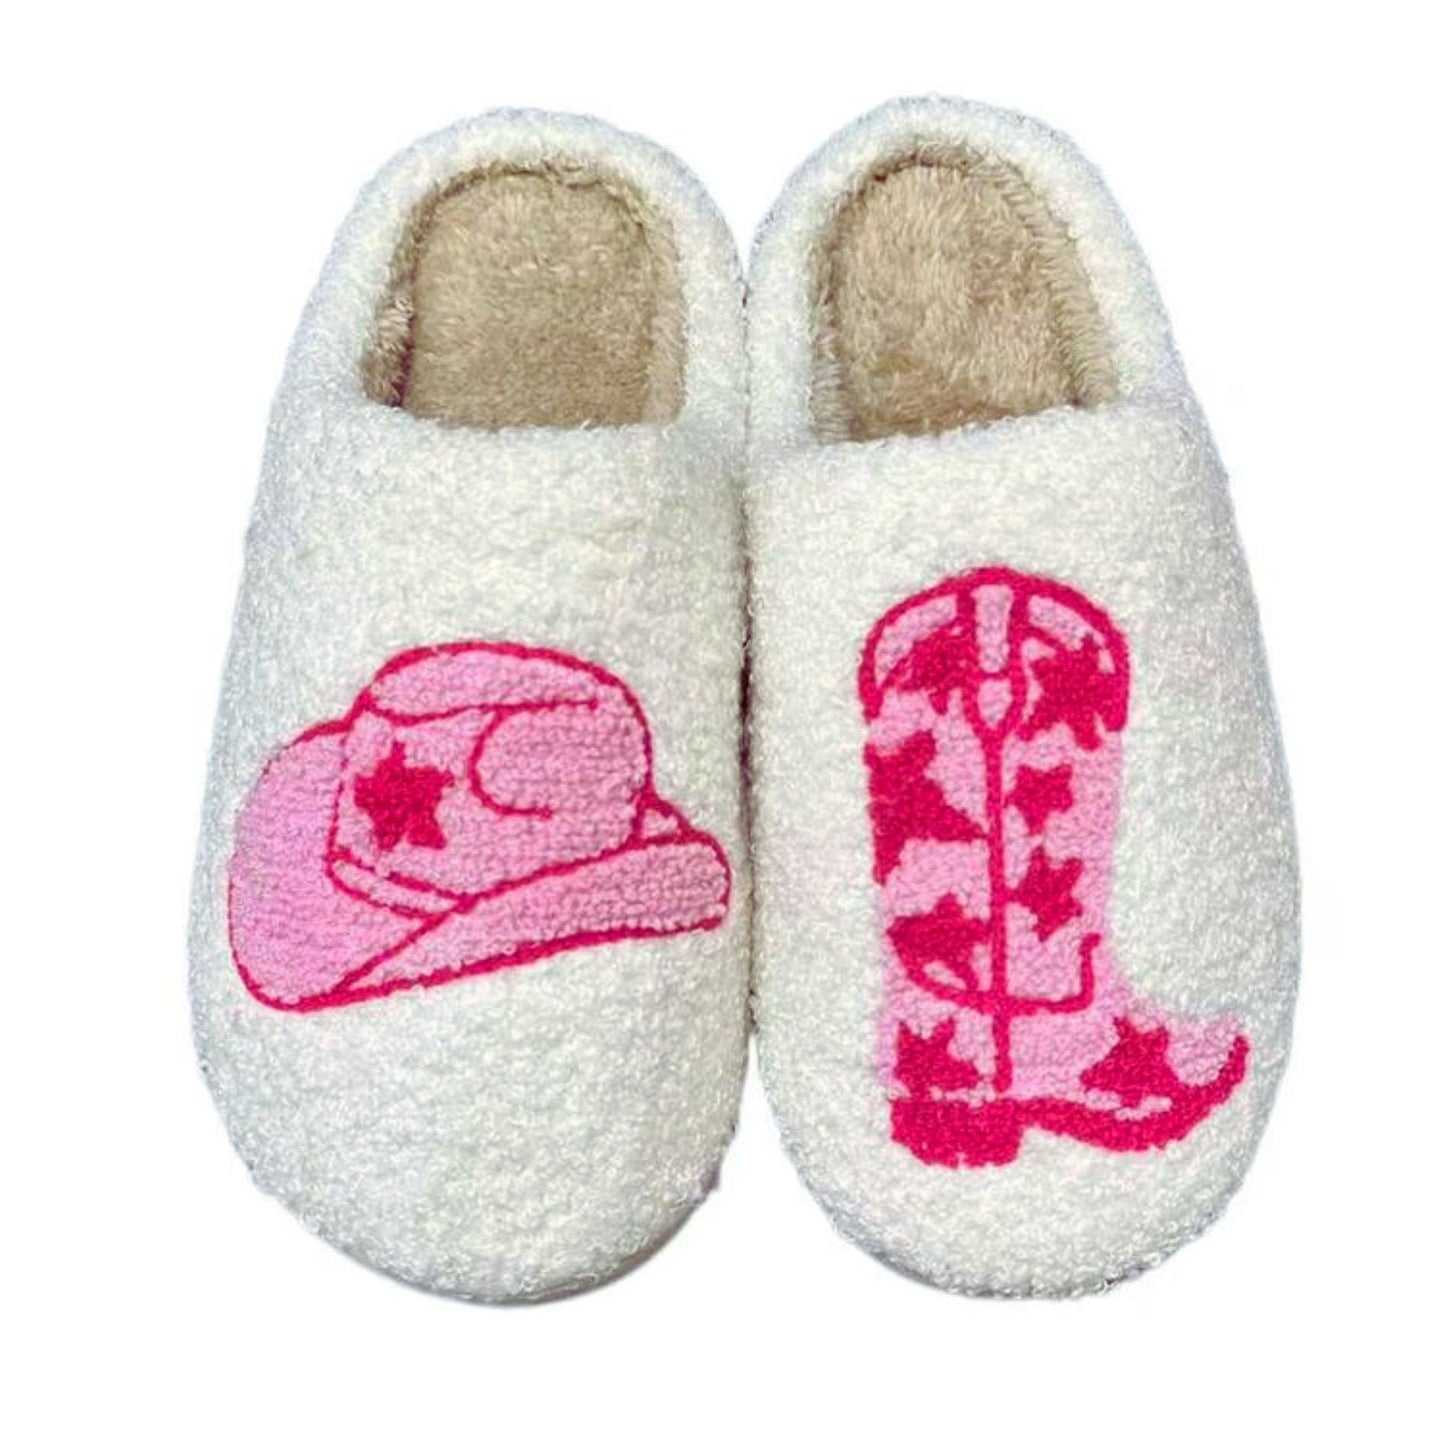 Pink Cowgirl Plush Cozy Women's Slippers | Giftable Slip-On Mules House Shoes with Hat and Boot Motif